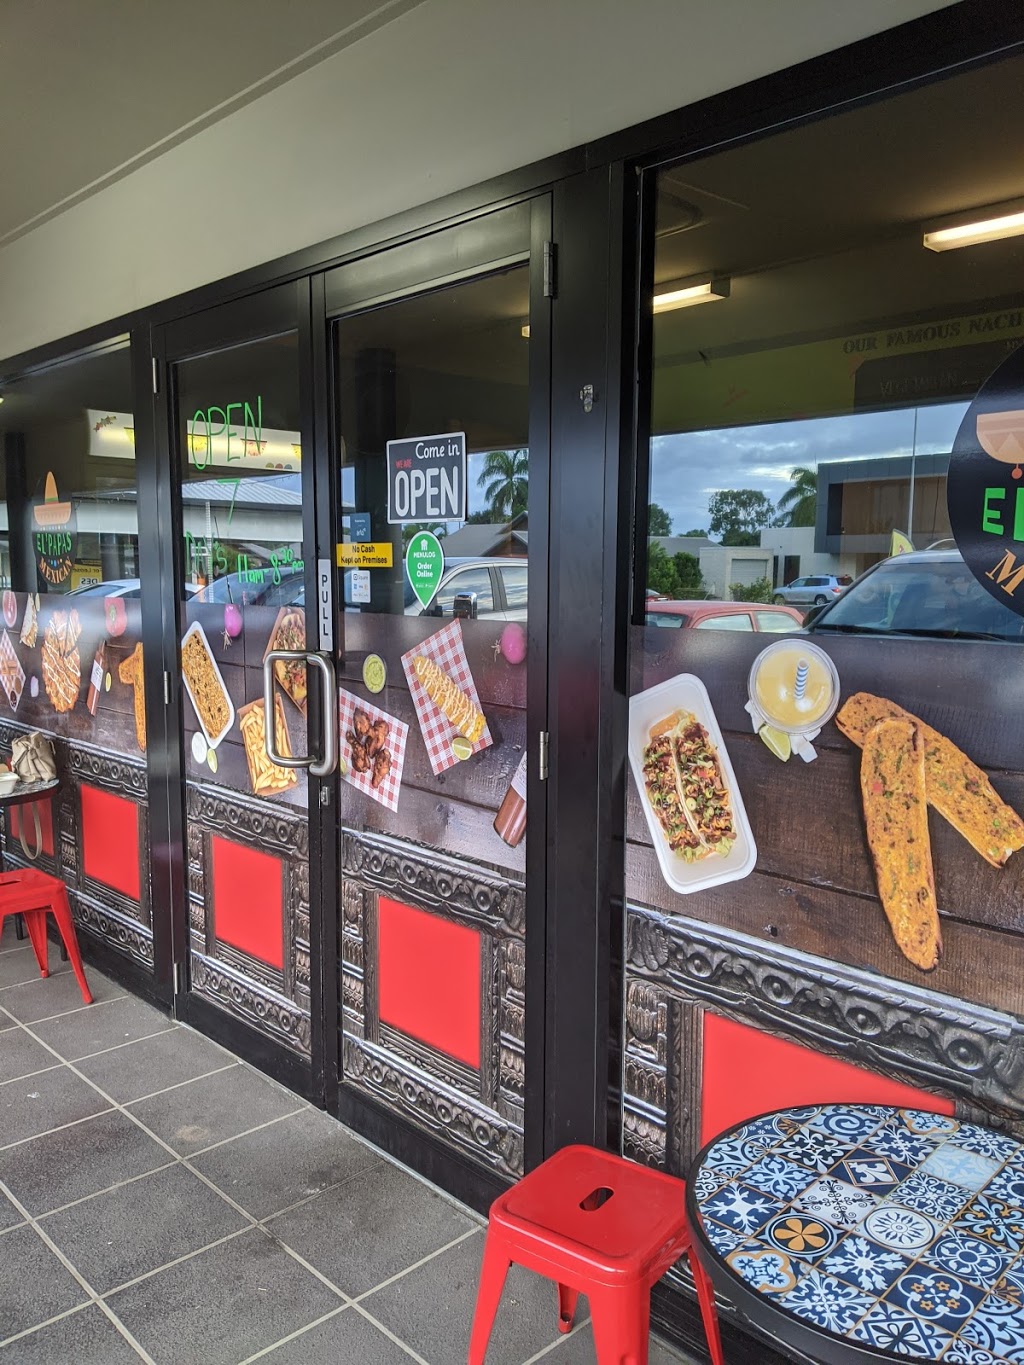 EL PAPAS Take Away | meal takeaway | Shop 3/10 Central Drive, Andergrove and Mackay City, 98 Victoria St, Mackay QLD 4740, Australia | 0748623472 OR +61 7 4862 3472